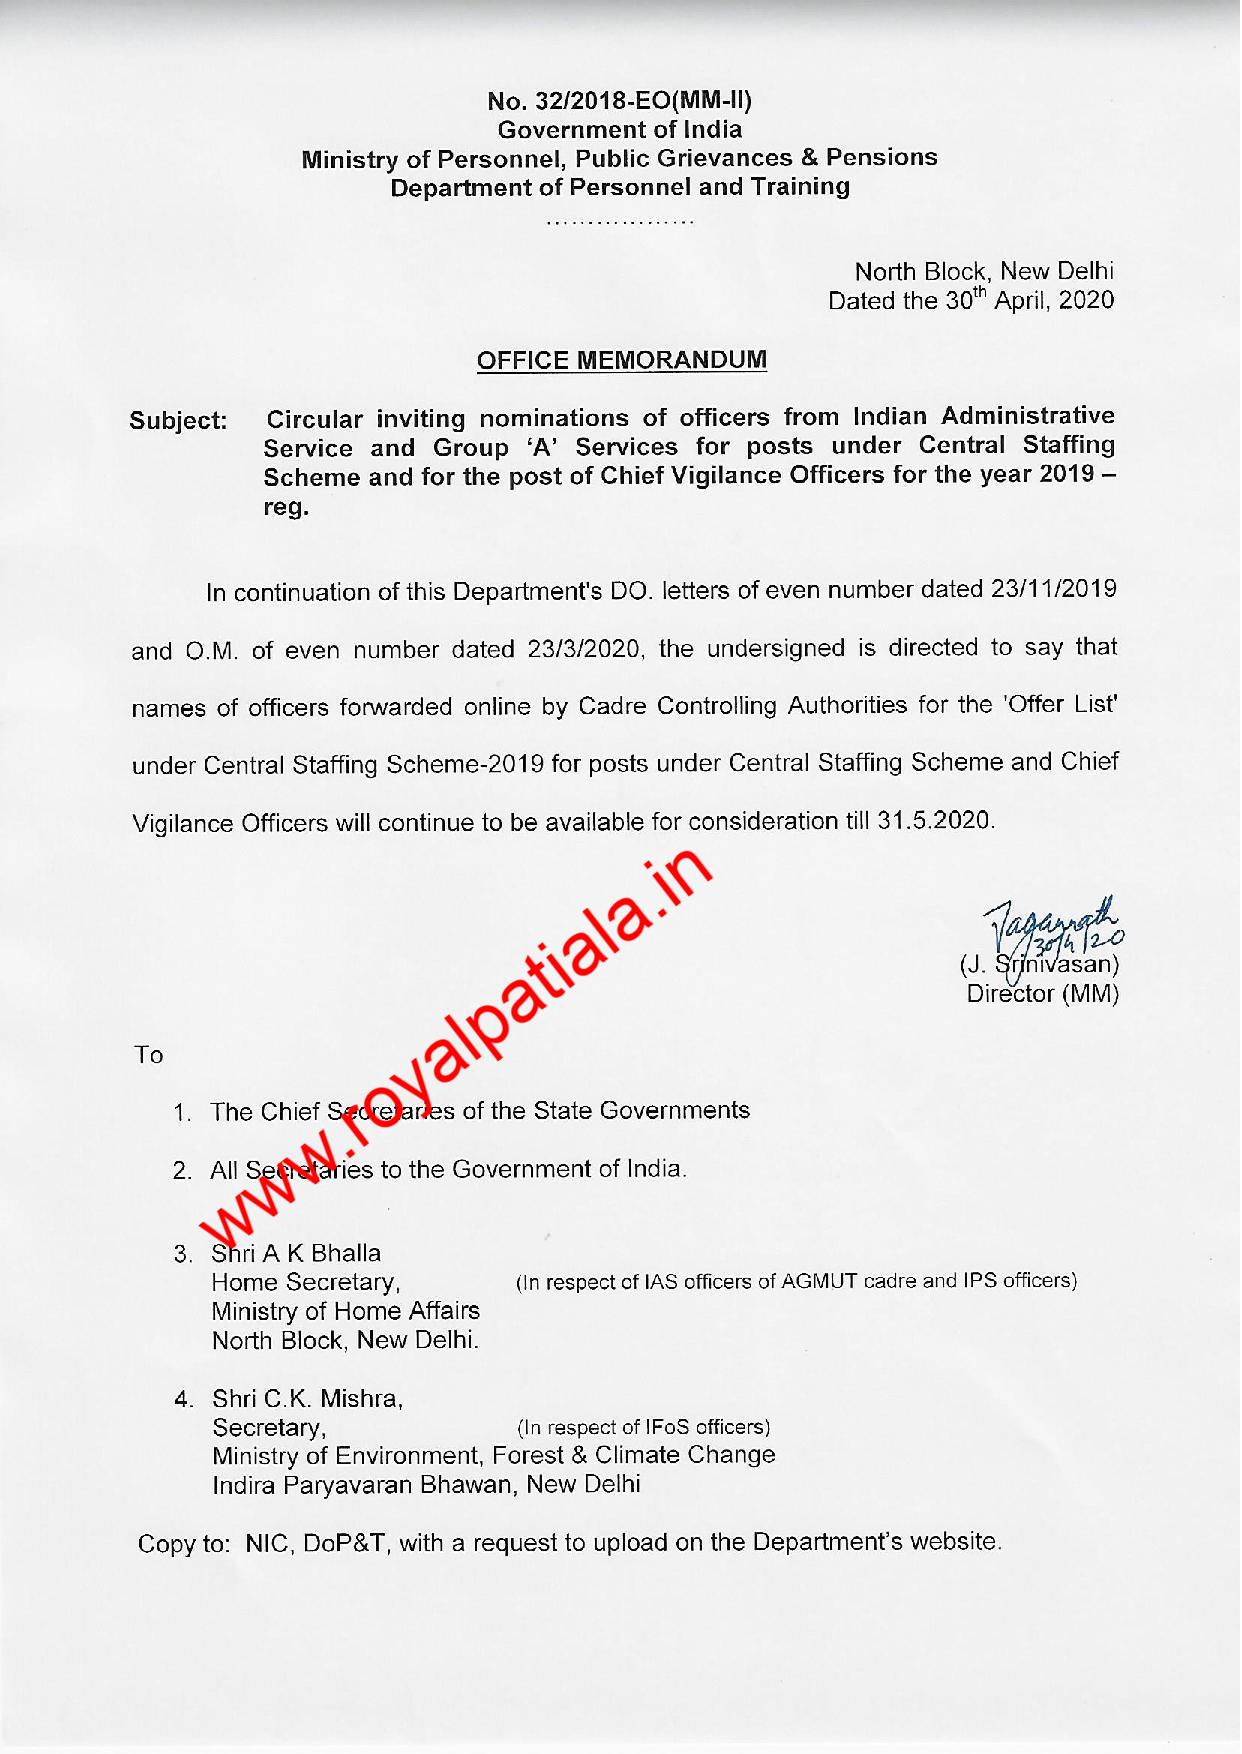 Govt extended date for IAS, Group A officers applying for posts under CSS,CVO